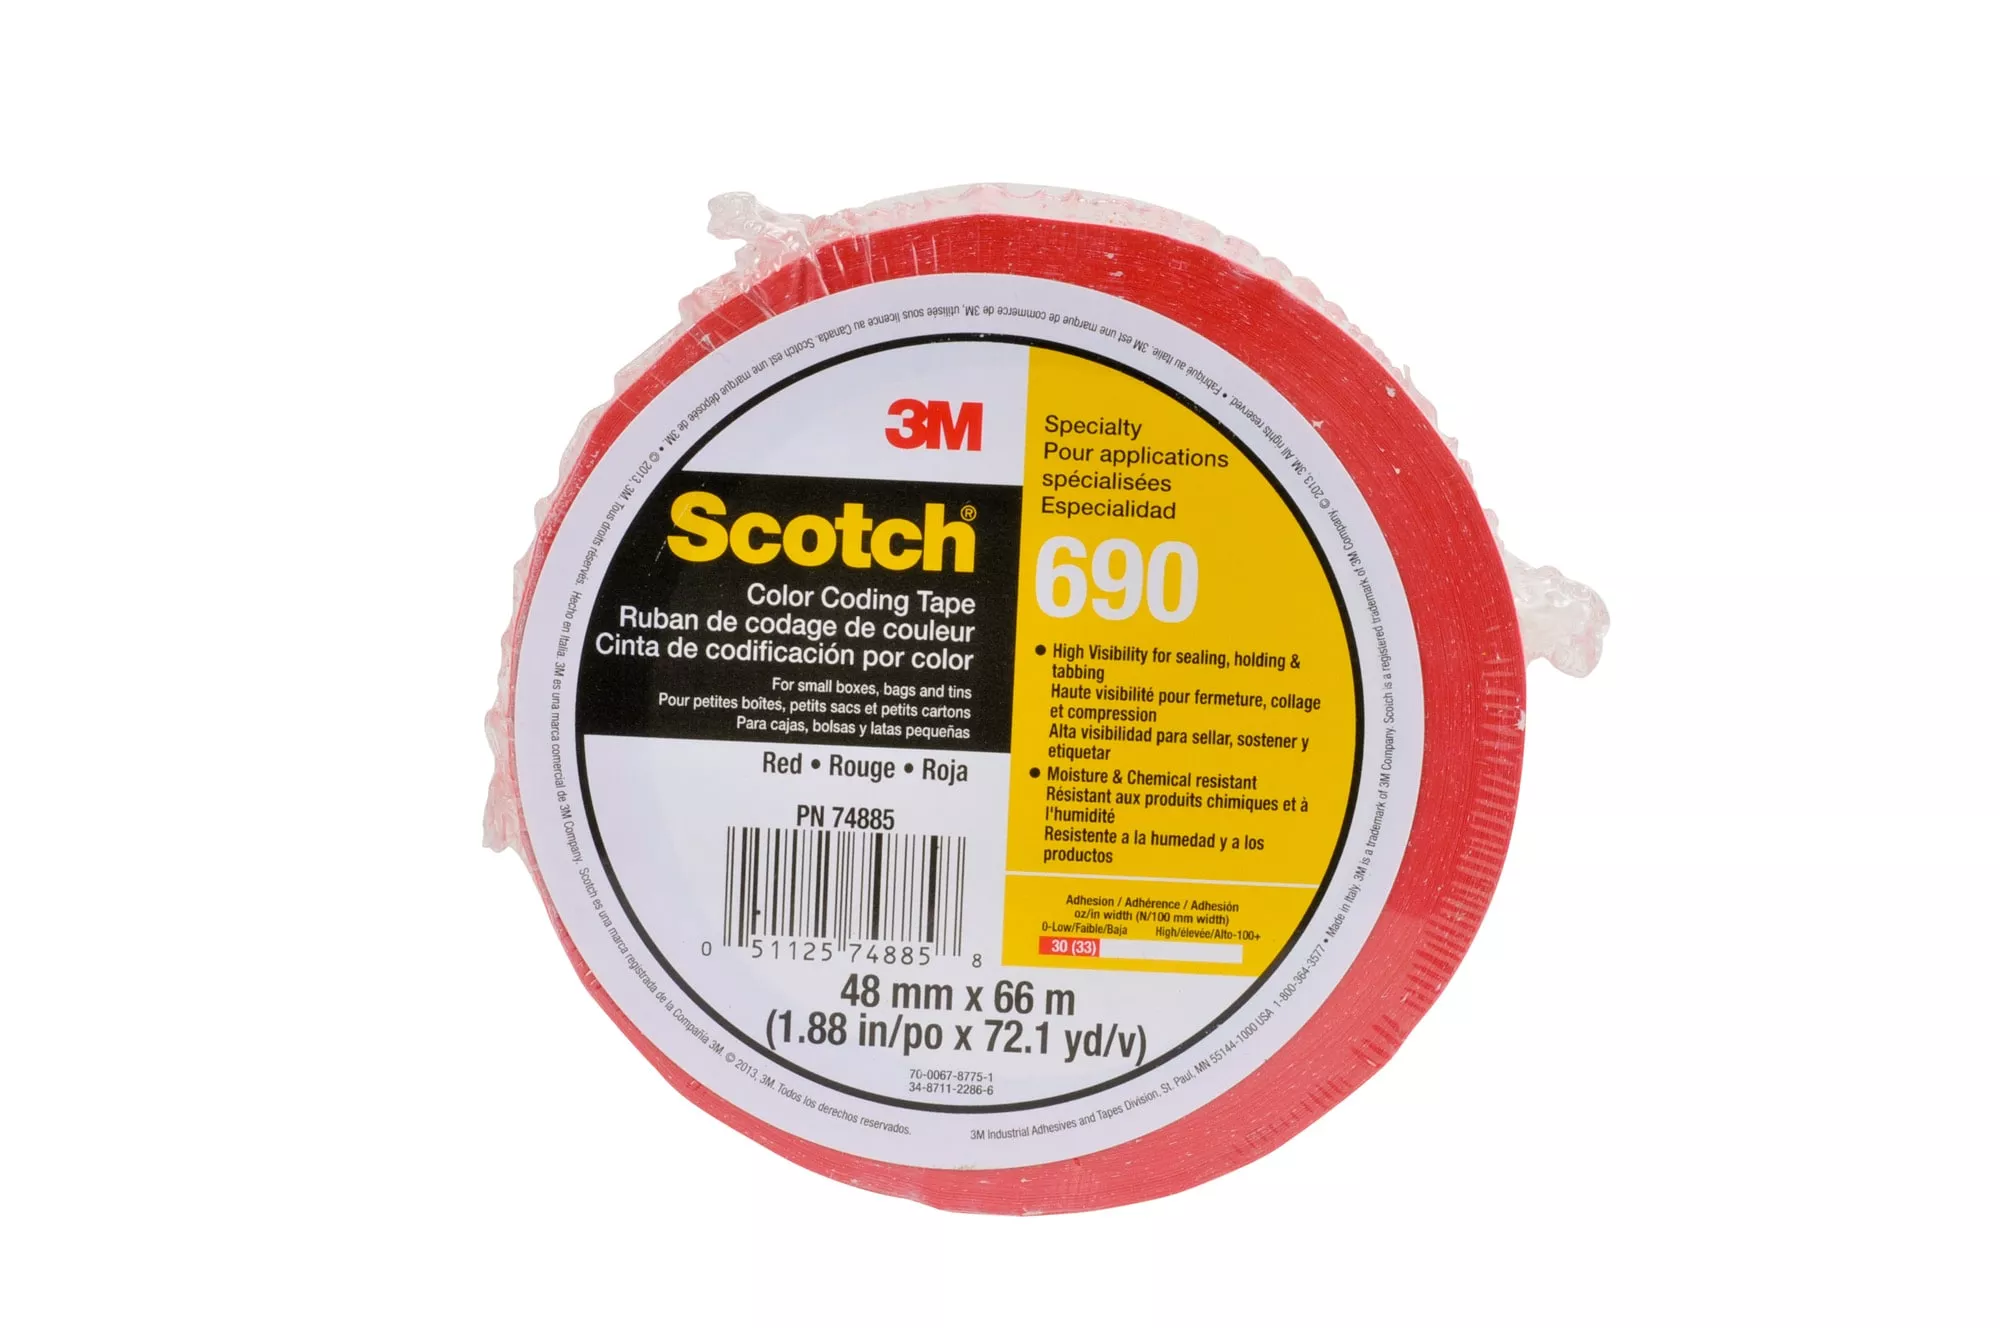 Scotch™ Color Coding Tape 690, Red, 48 mm x 66 m, 36 Rolls/Case,
Individually Wrapped Conveniently Packaged